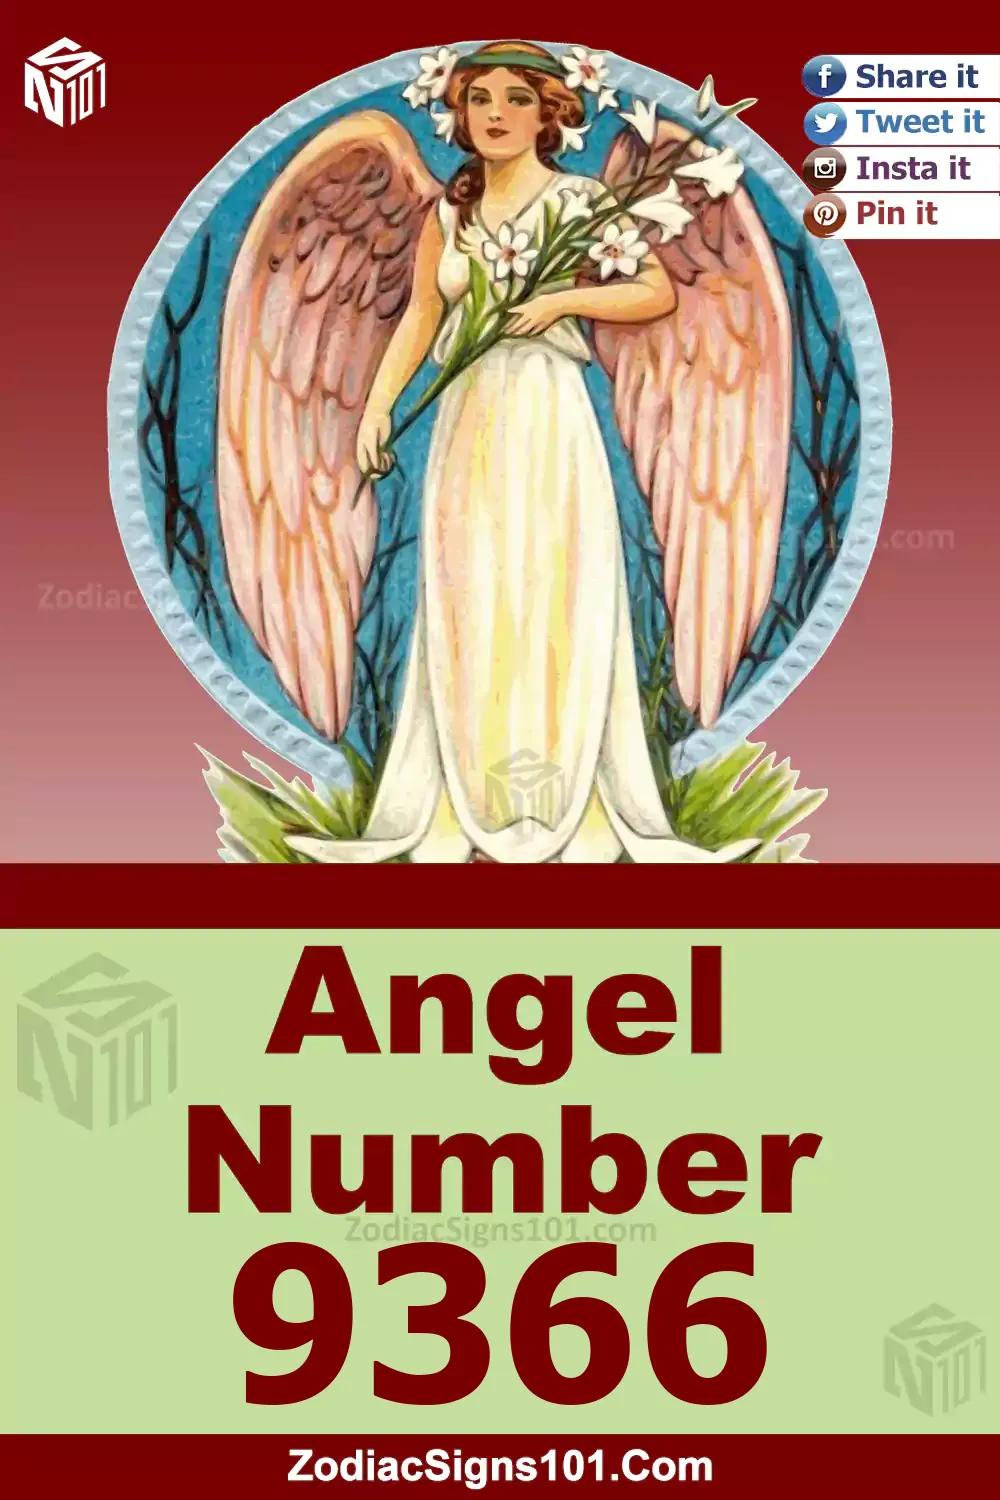 9366 Angel Number Meaning